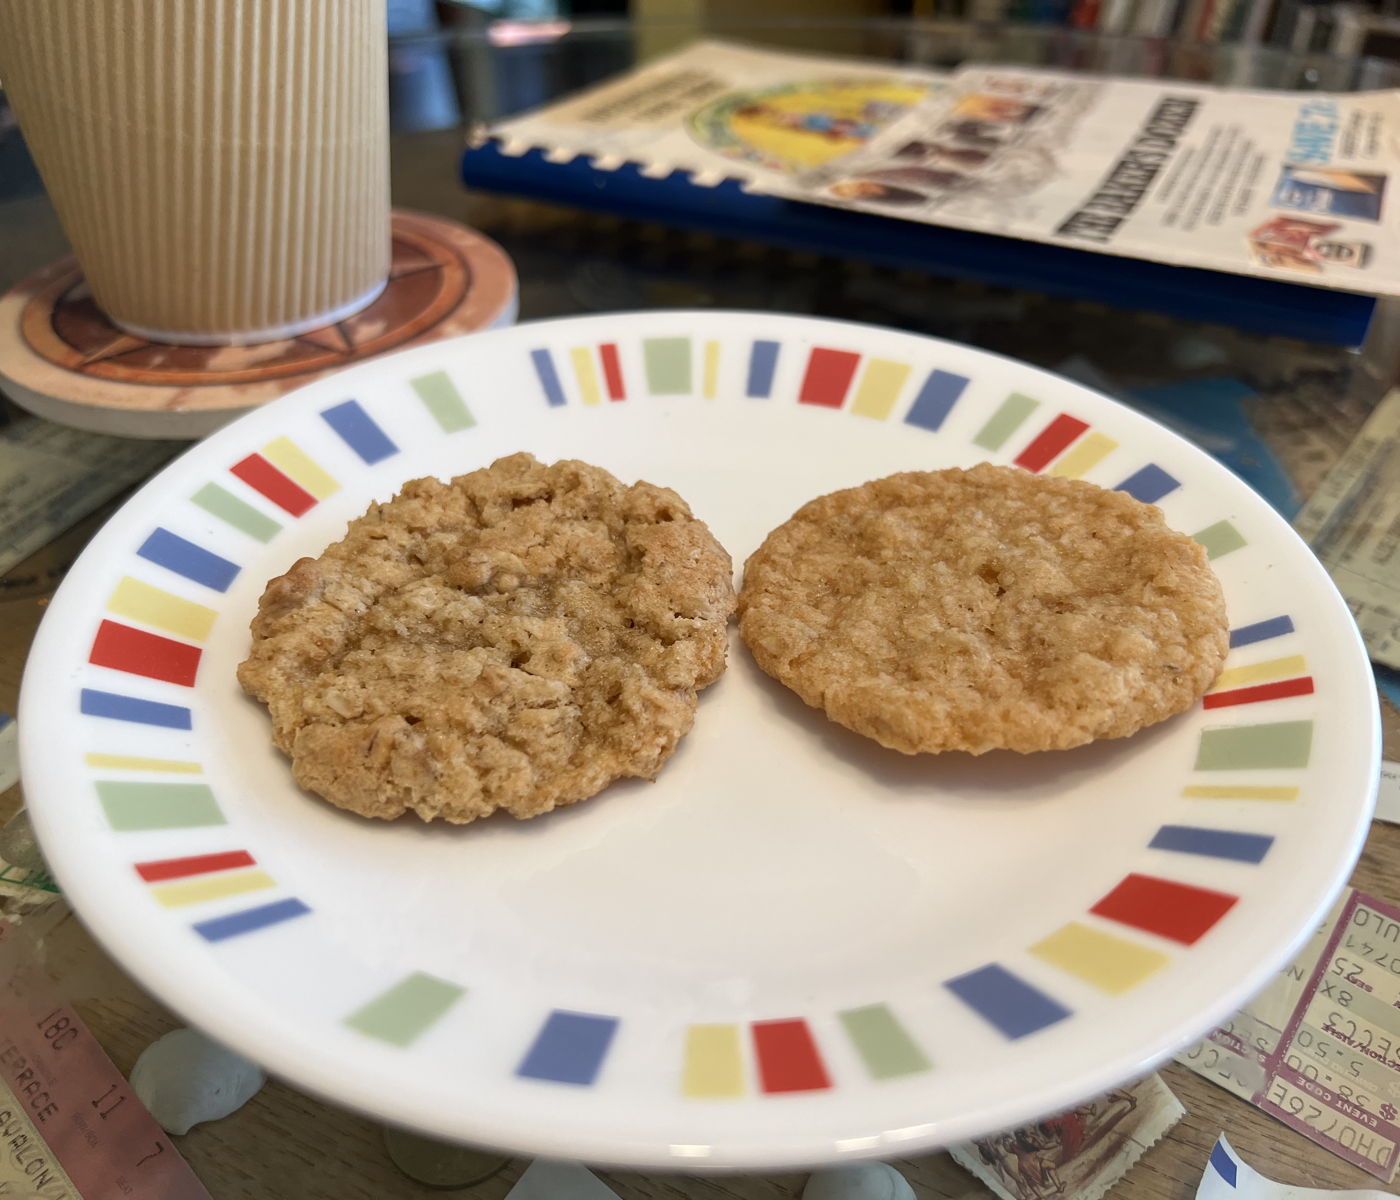 Fruitport and Baker’s coconut oatmeal cookies compared